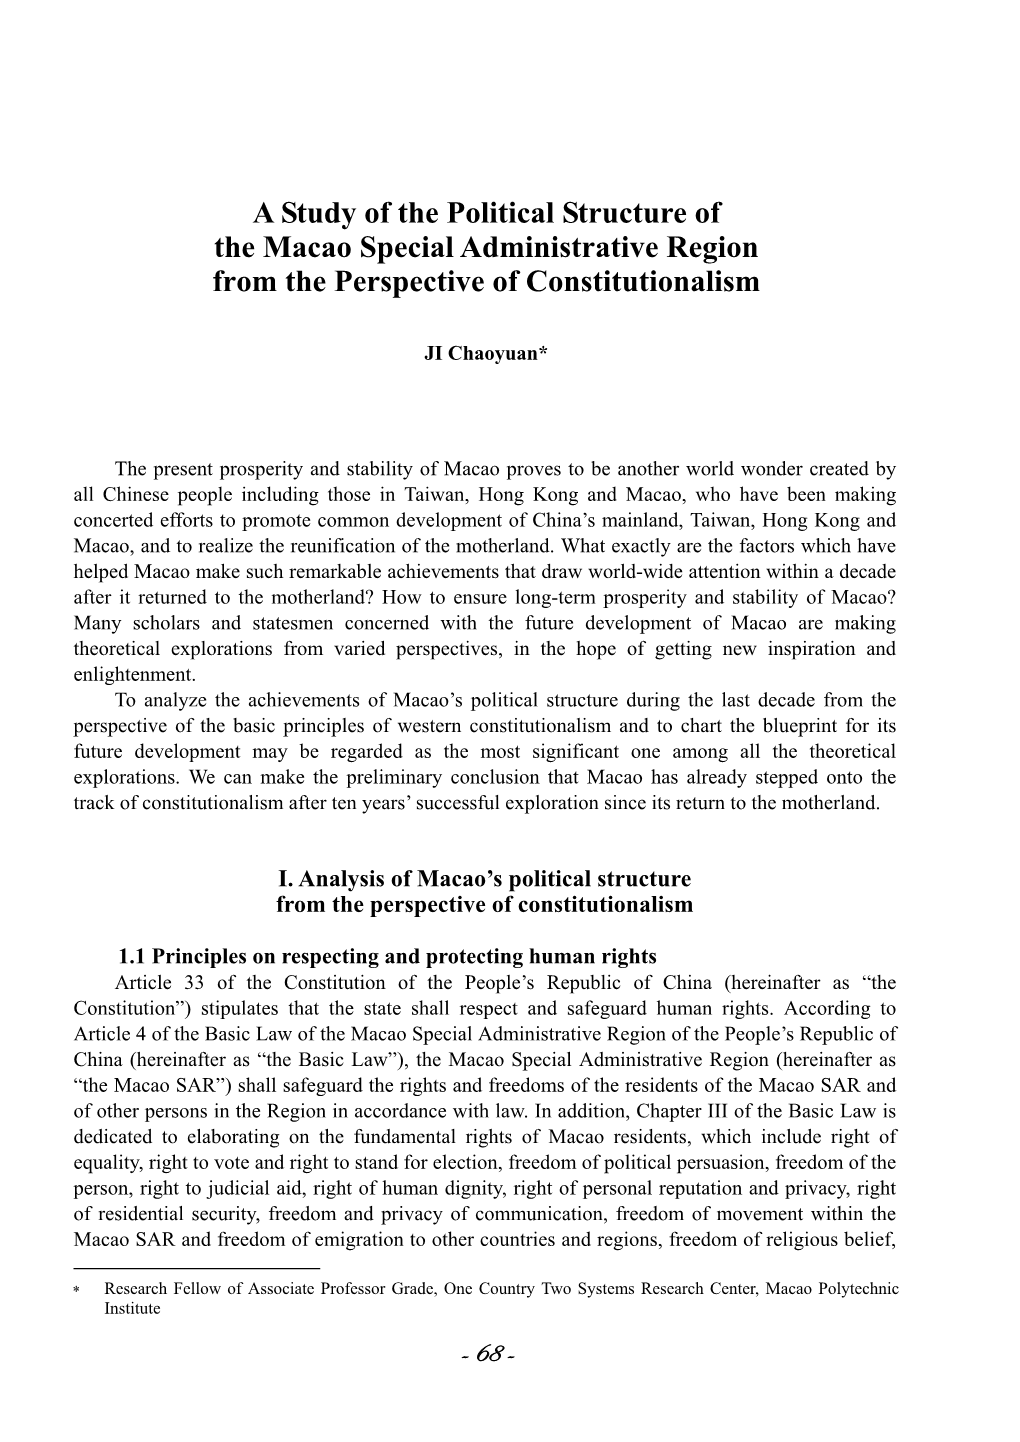 A Study of the Political Structure of the Macao Special Administrative Region from the Perspective of Constitutionalism